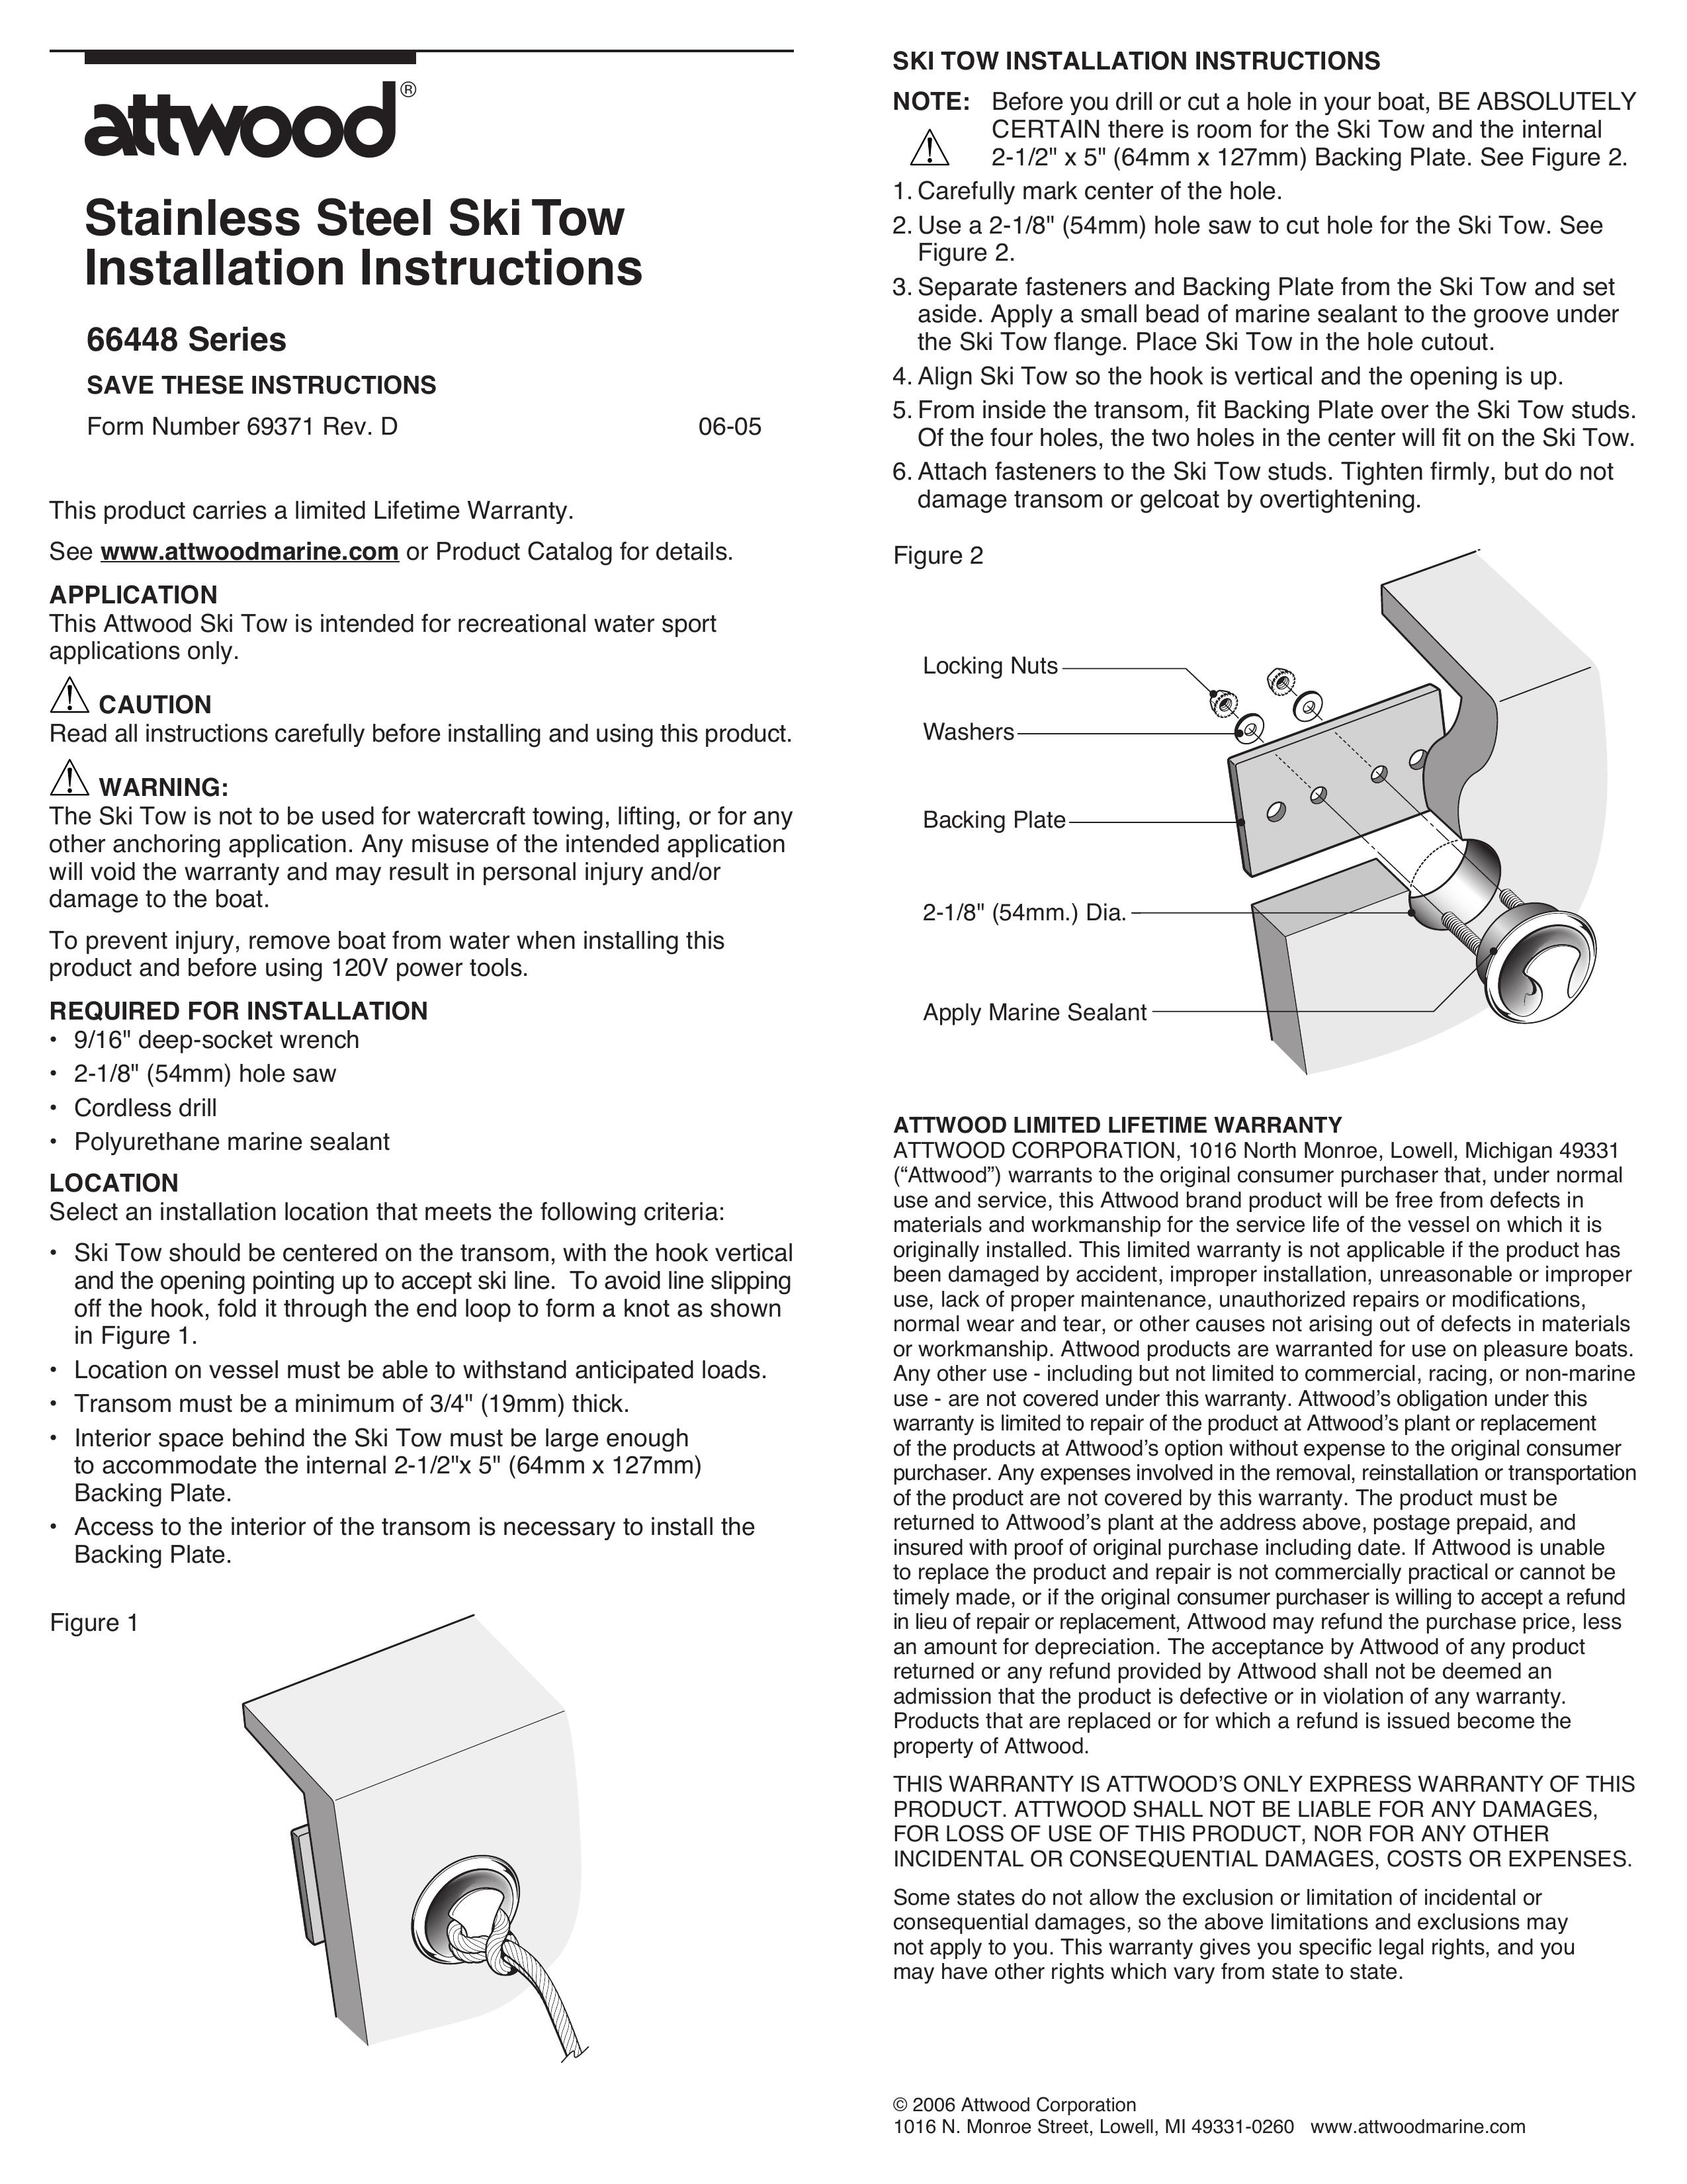 Attwood 66448 Series Boating Equipment User Manual (Page 1)